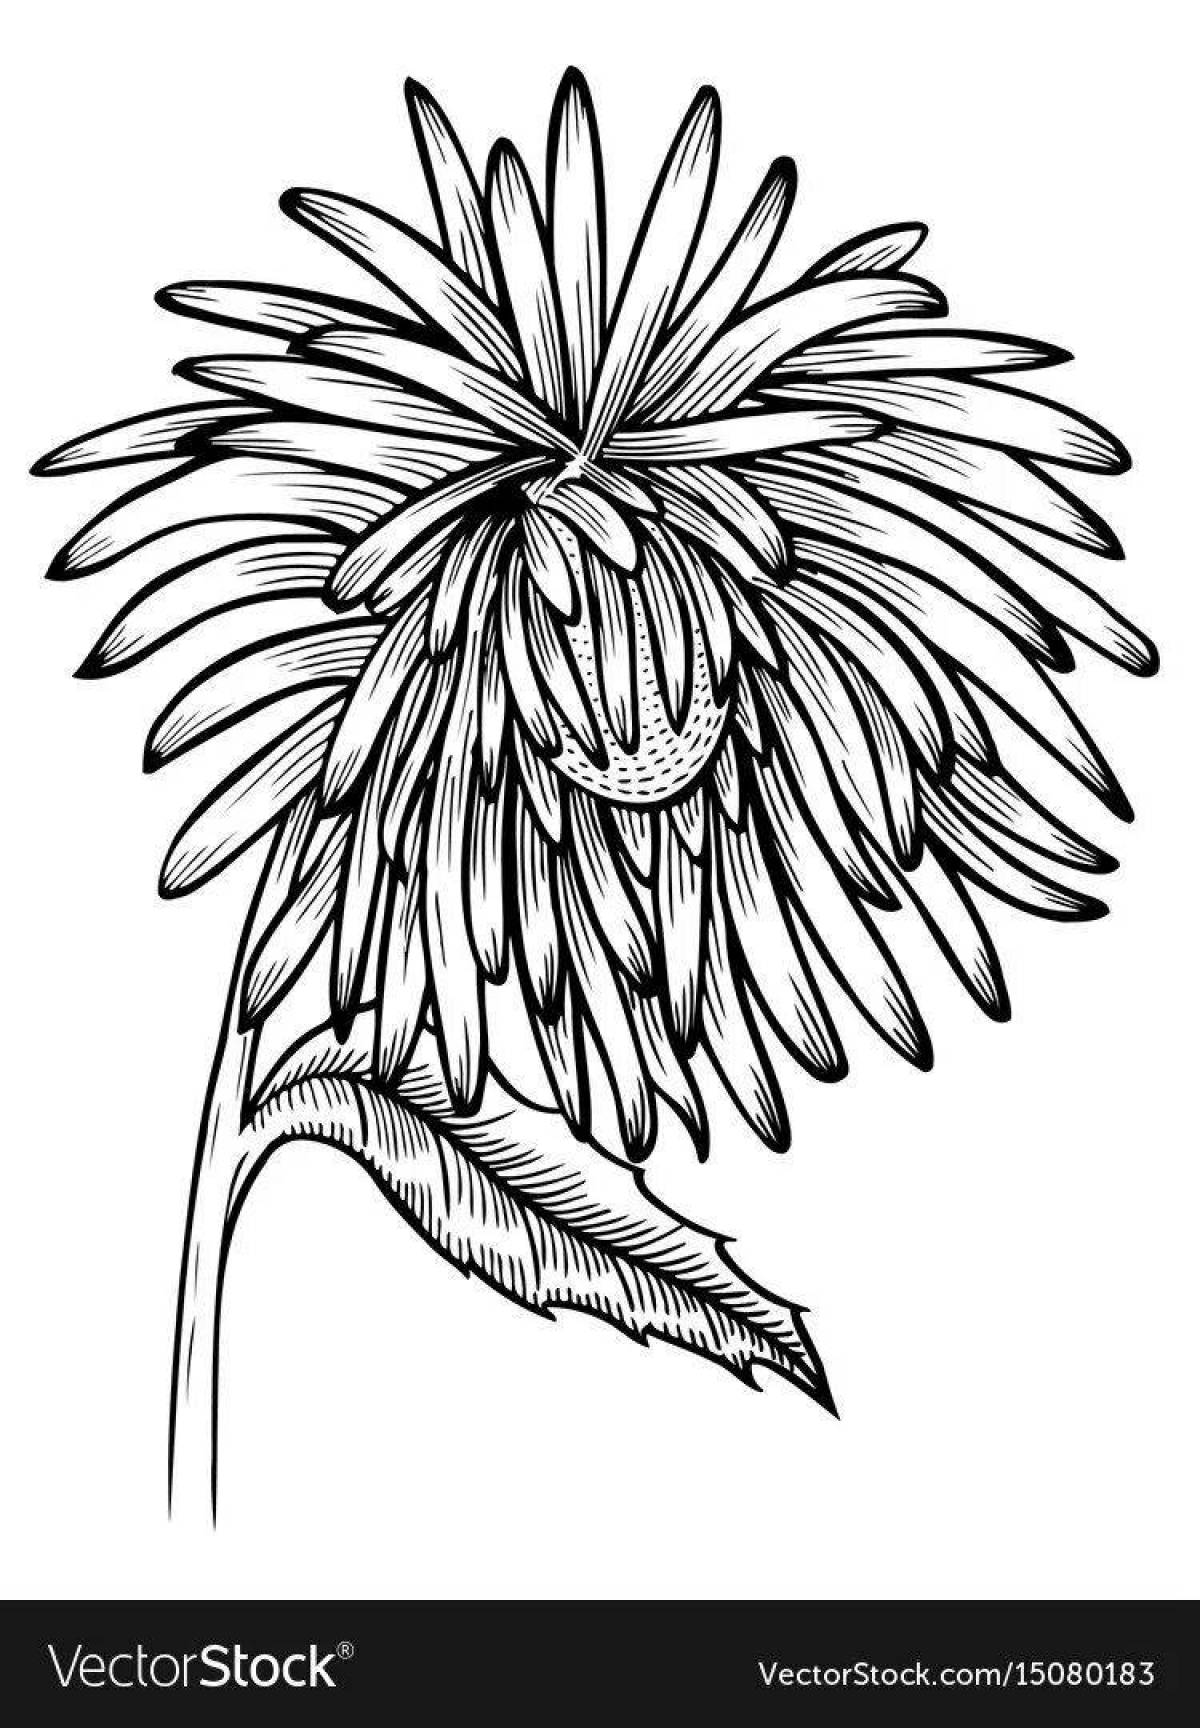 Fancy aster coloring book for kids